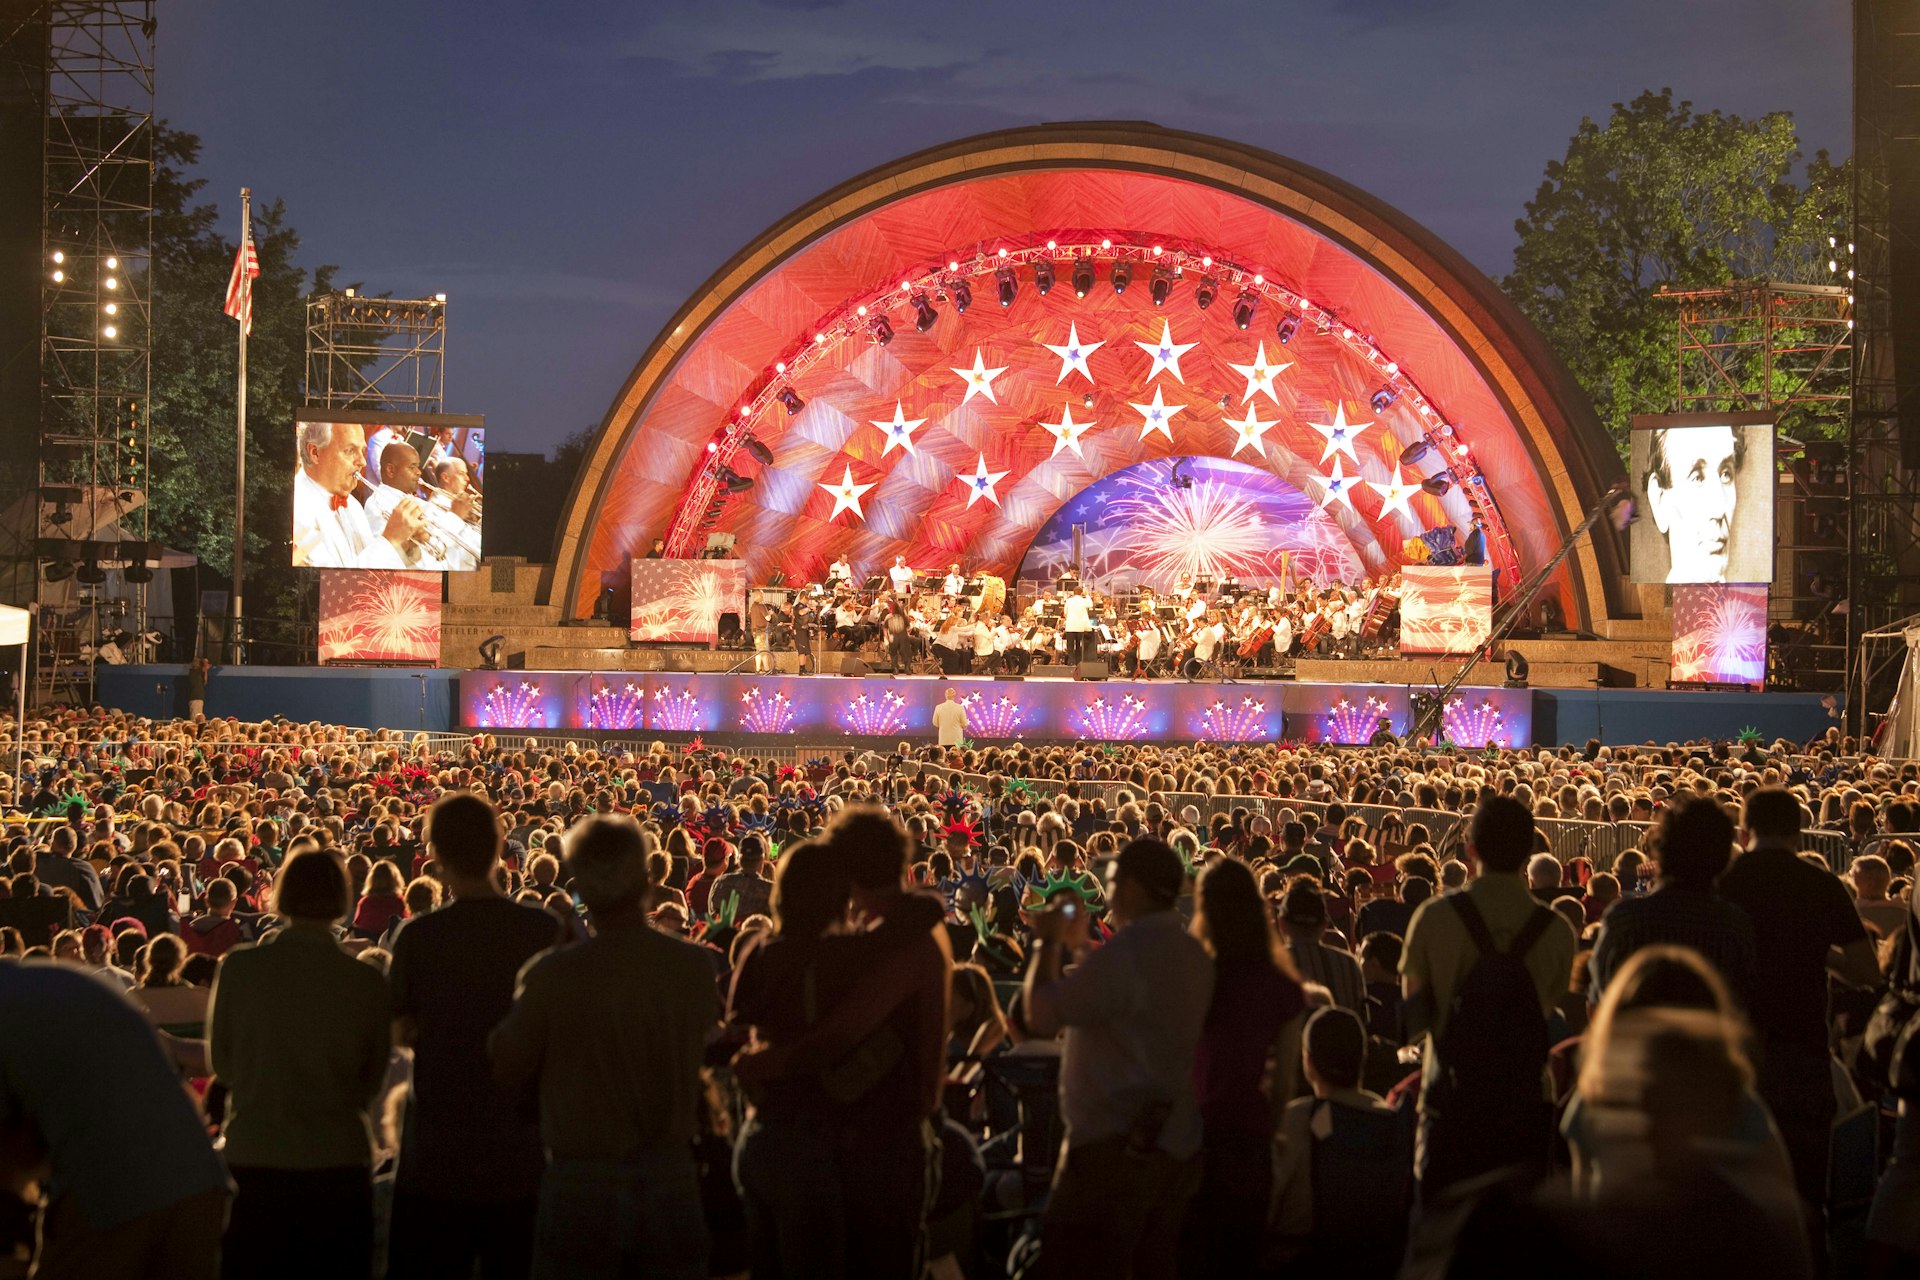 A crowd of people watch the brightly colored stage as the Boston Pops perform at the Hatch Memorial Shell in Boston